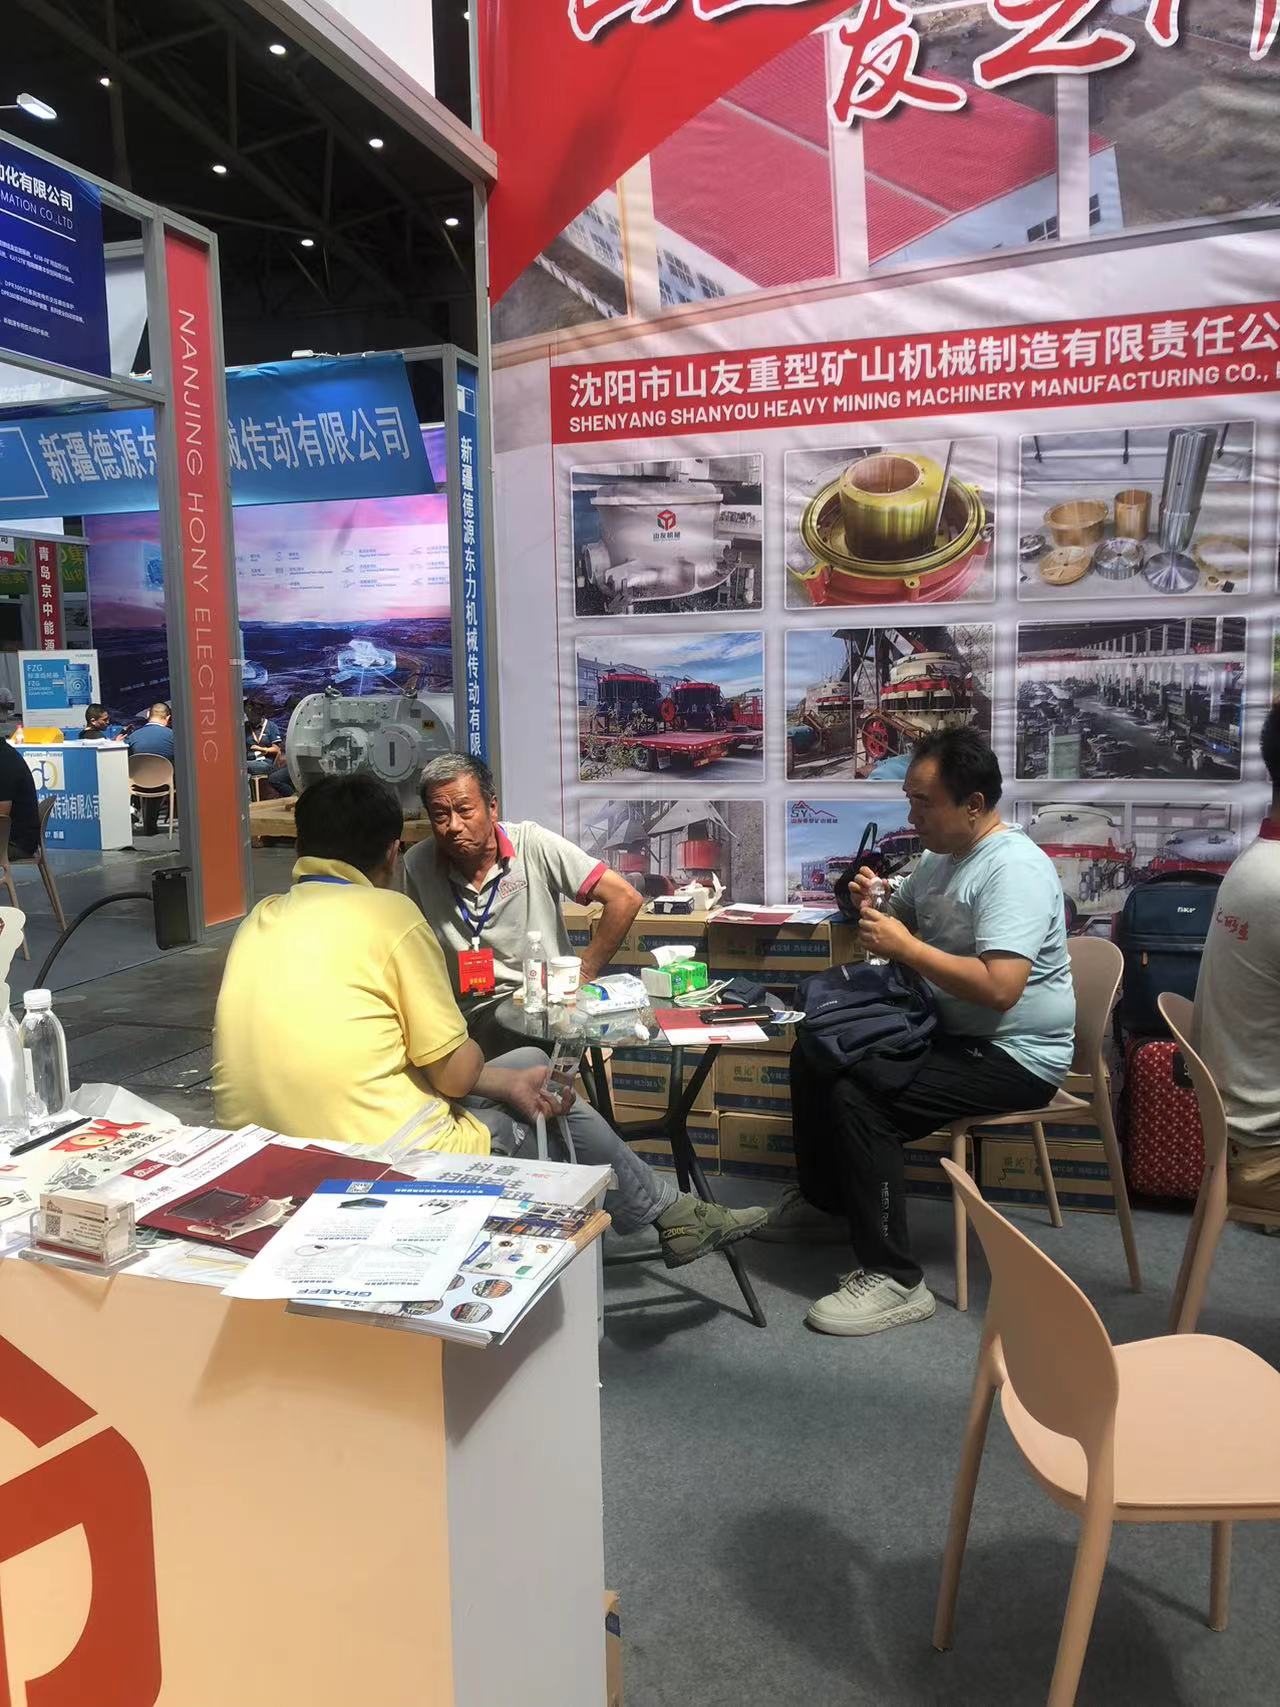 Exhibition results in Xinjiang